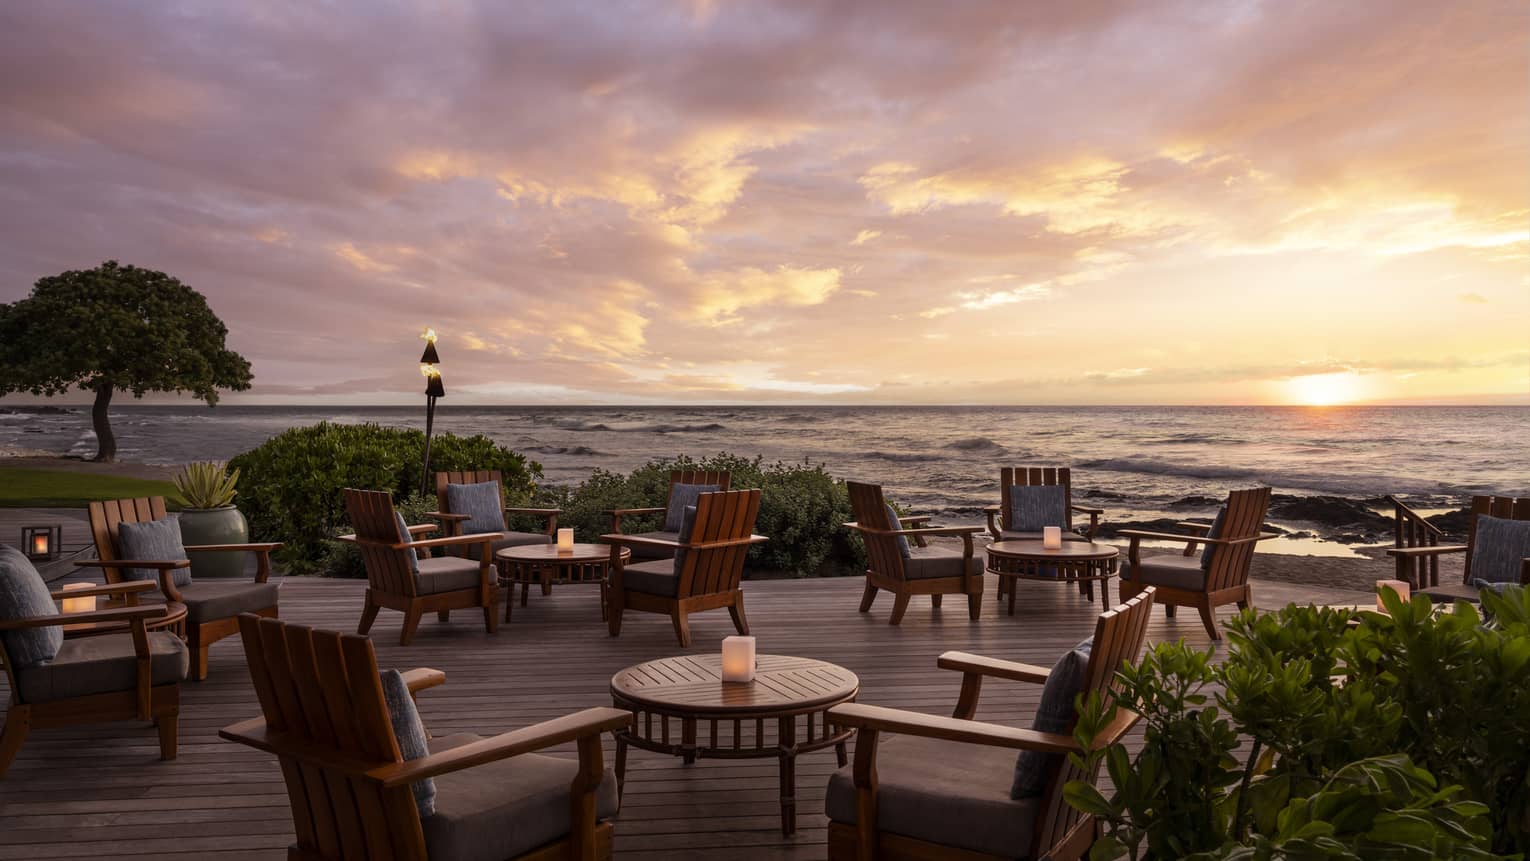 Restaurant terrace next to the ocean at sunset